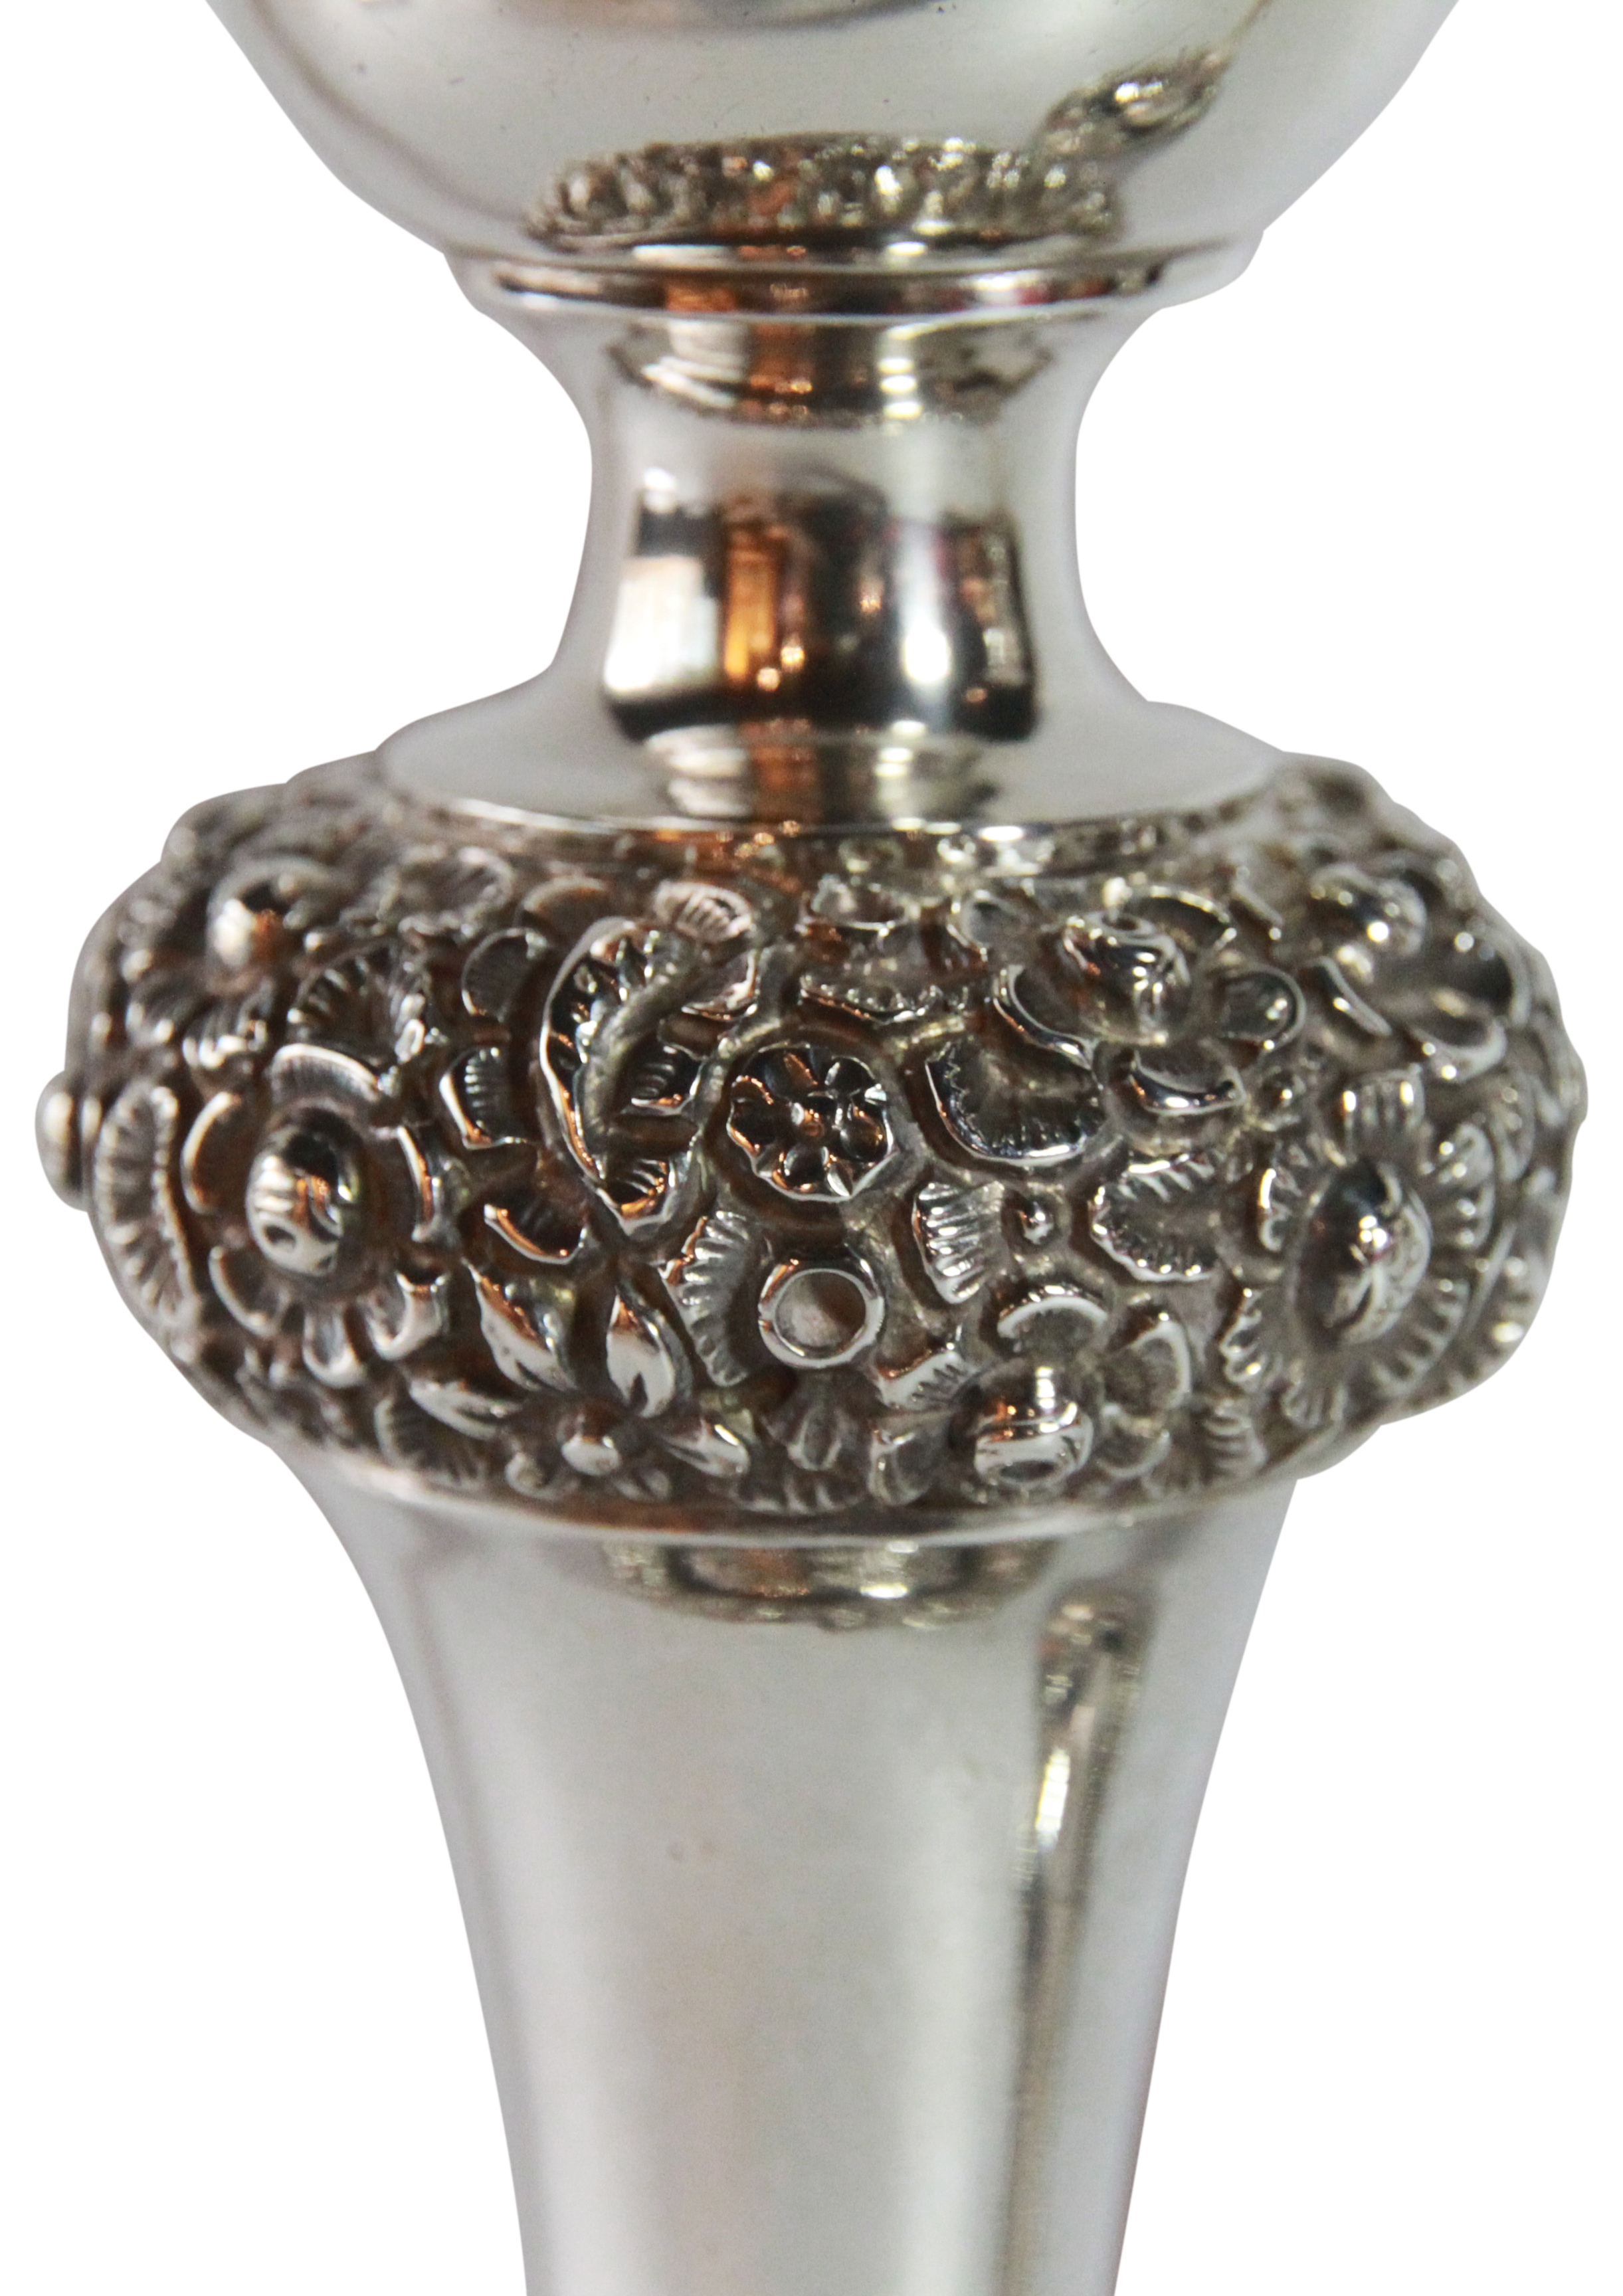 A pair of German Silver rounded candlesticks with stylized floral decoration - circa 1838 - (H: - Image 2 of 5